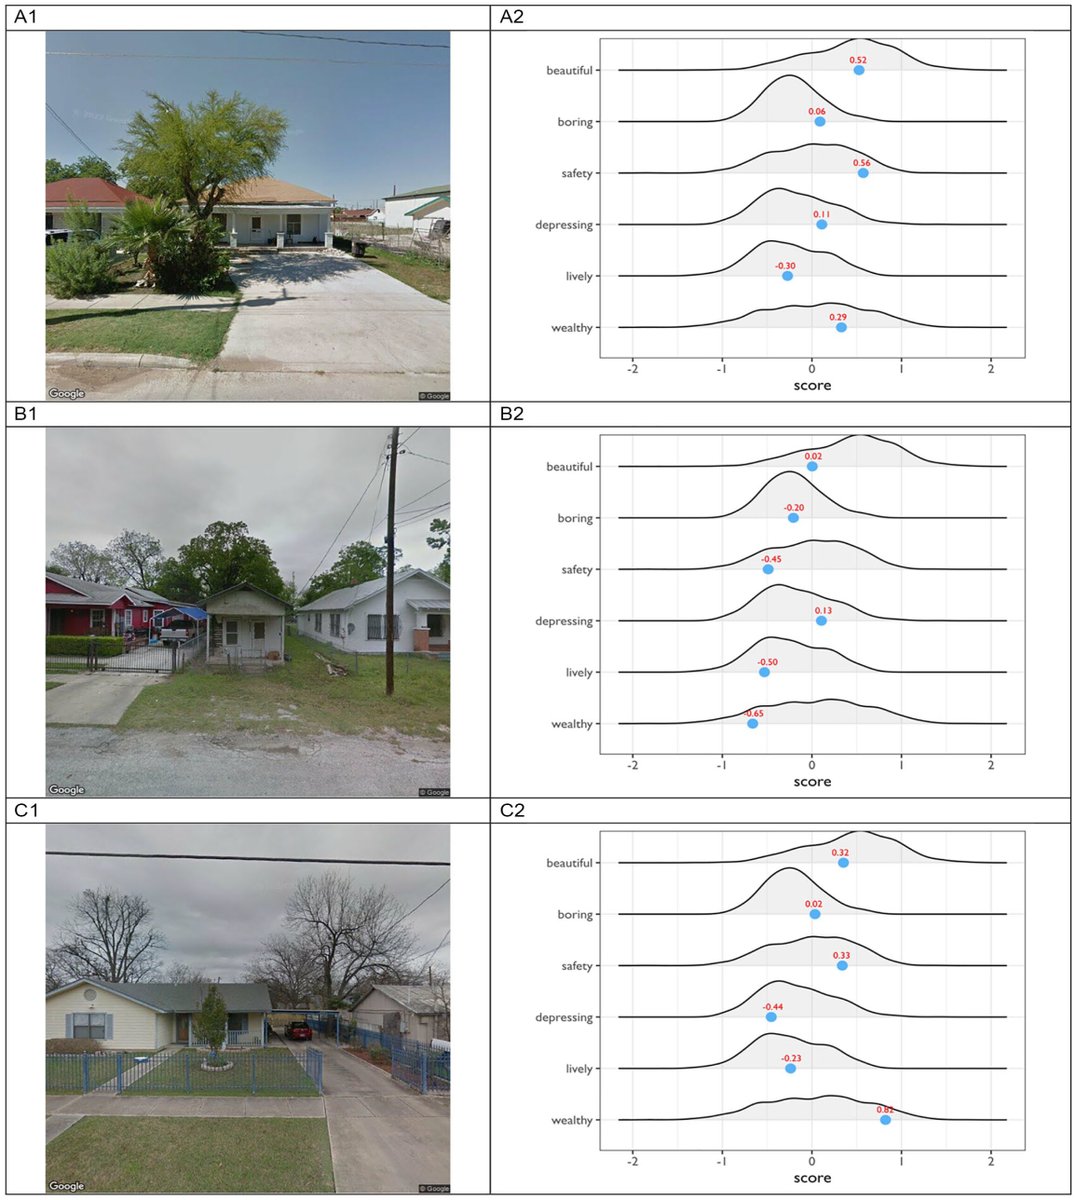 New #research about #MachineIntelligence show that it can assess human perception biases! Researchers from @TAMUSanAntonio @TAMU, examine the case of San Antonio, Texas. Read more about this research through the link! journals.sagepub.com/doi/full/10.11… @elopez8a @WeiZhai1209